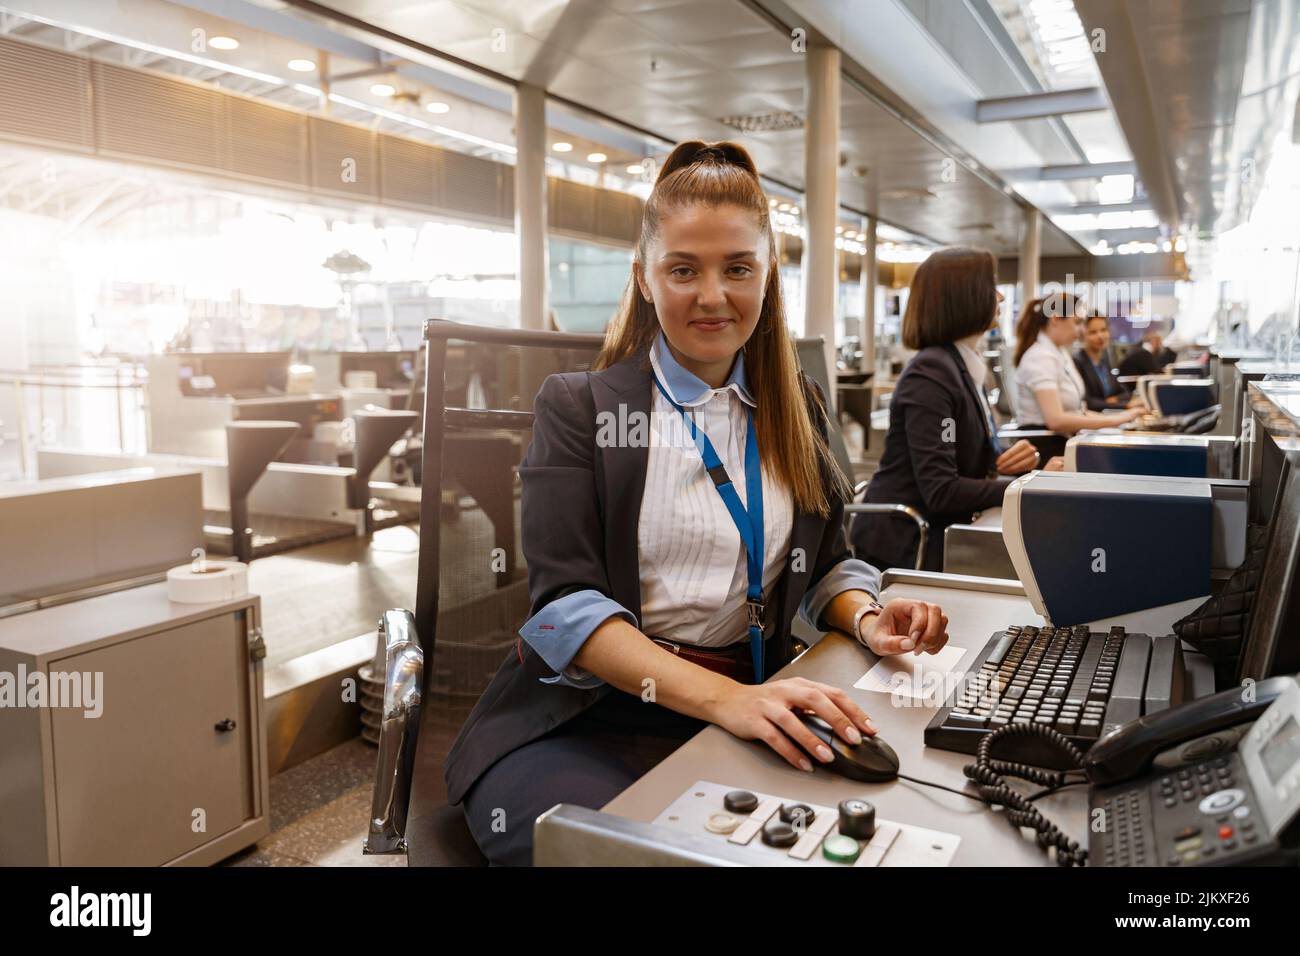 Woman airline employee working at airline check in counter in airport with colleagues on background Stock Photo